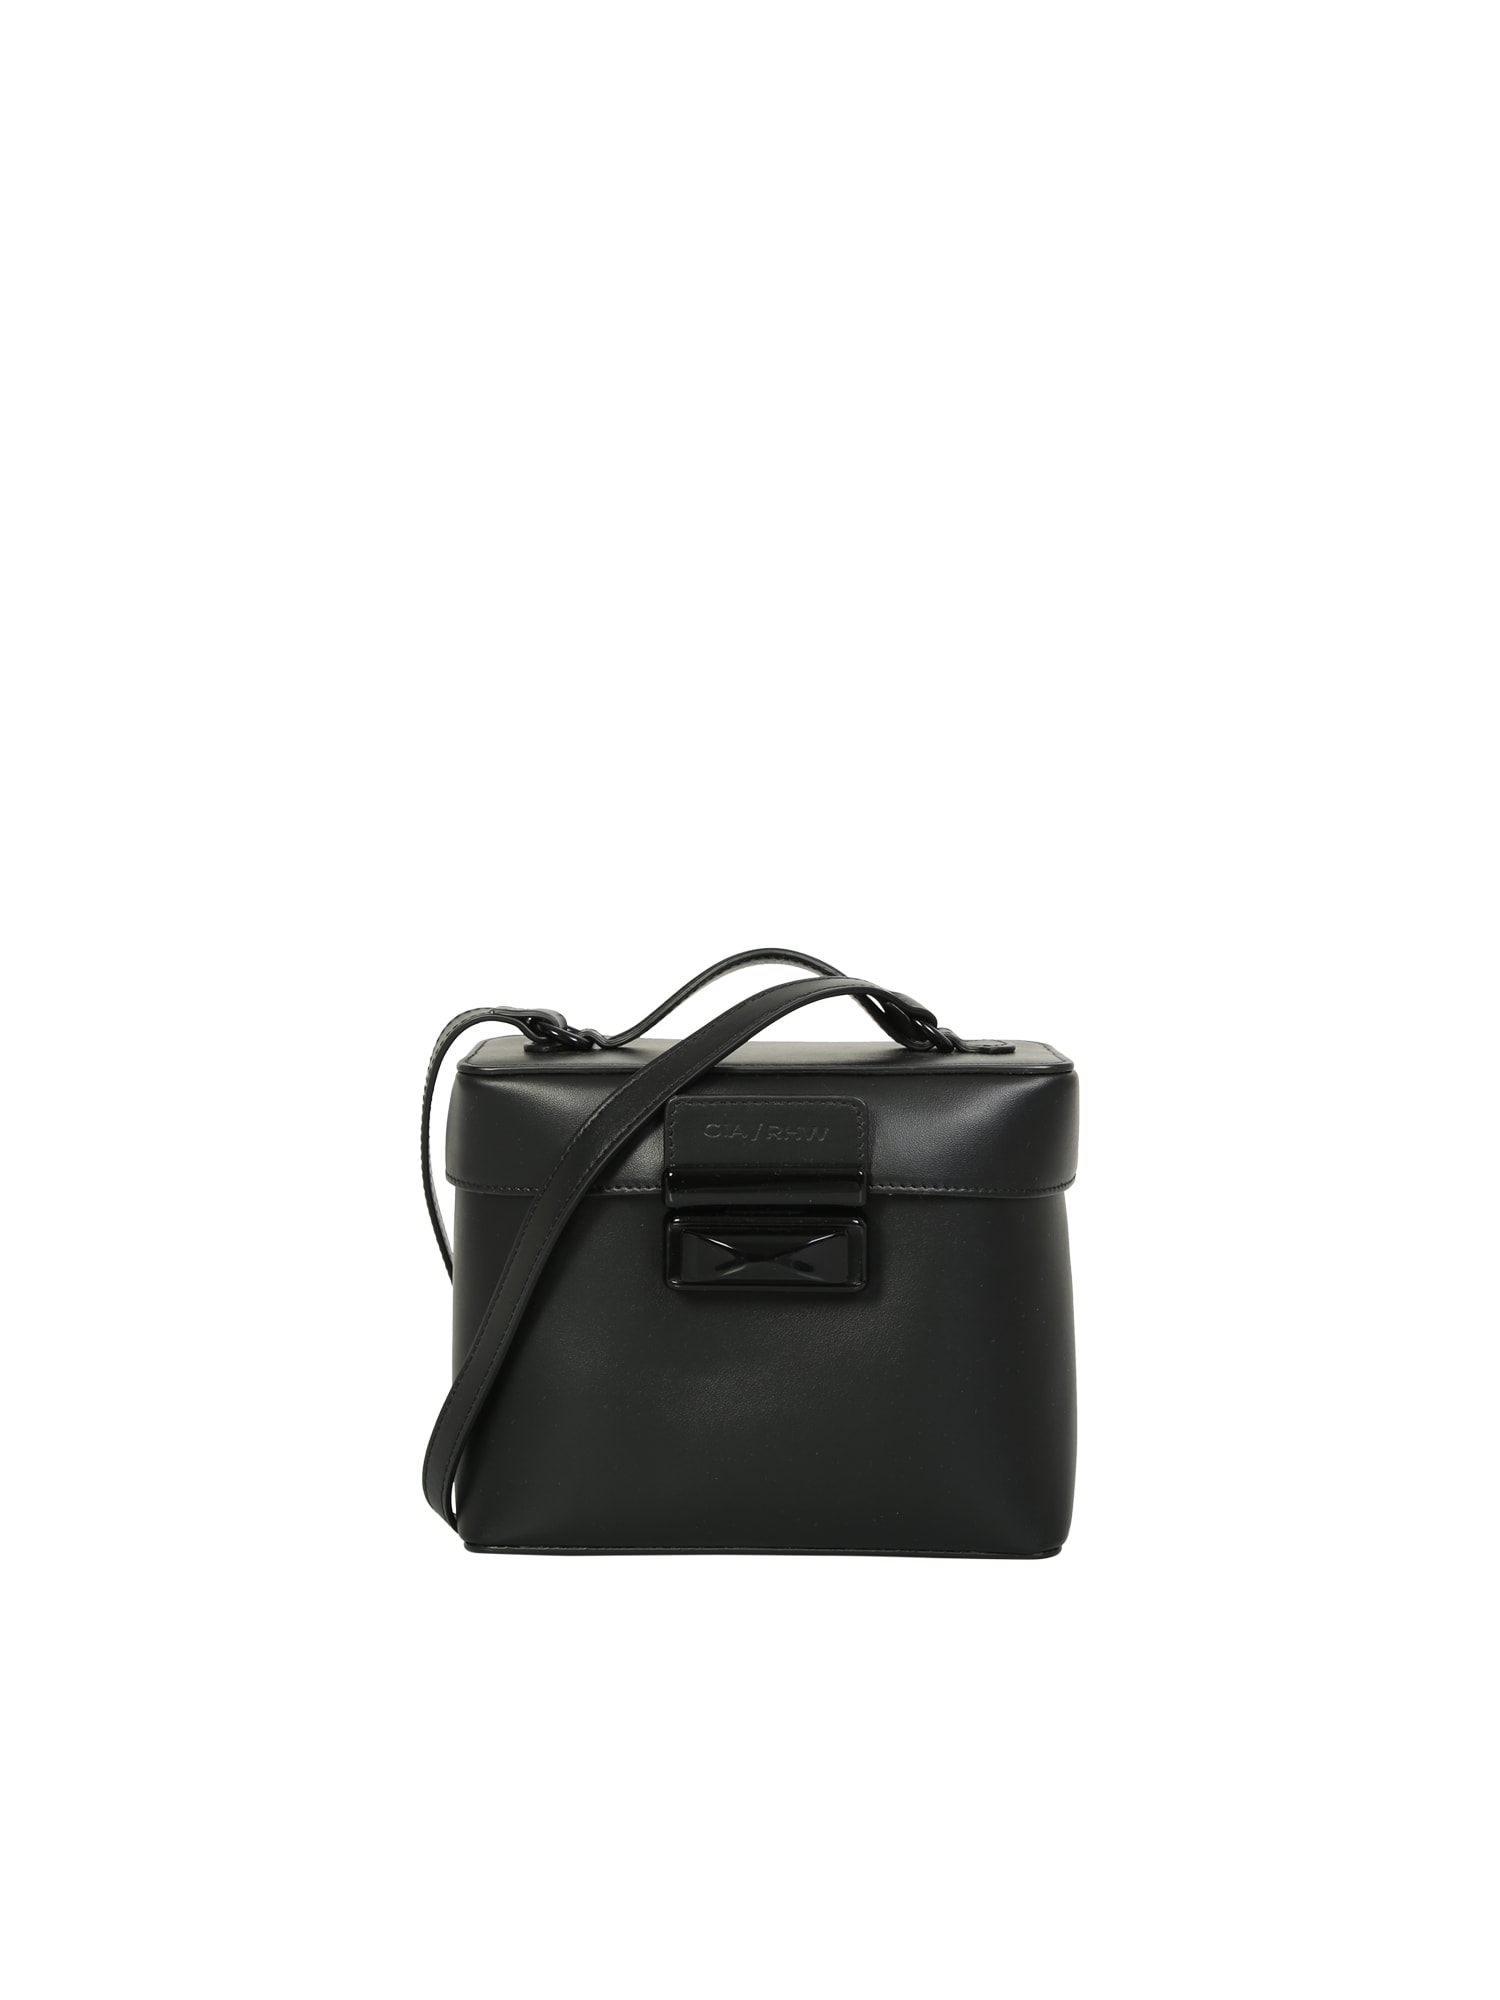 Combining Practicality With Style, Gia Borghini Present This Tote Bag Featuring A Boxy Silhouette